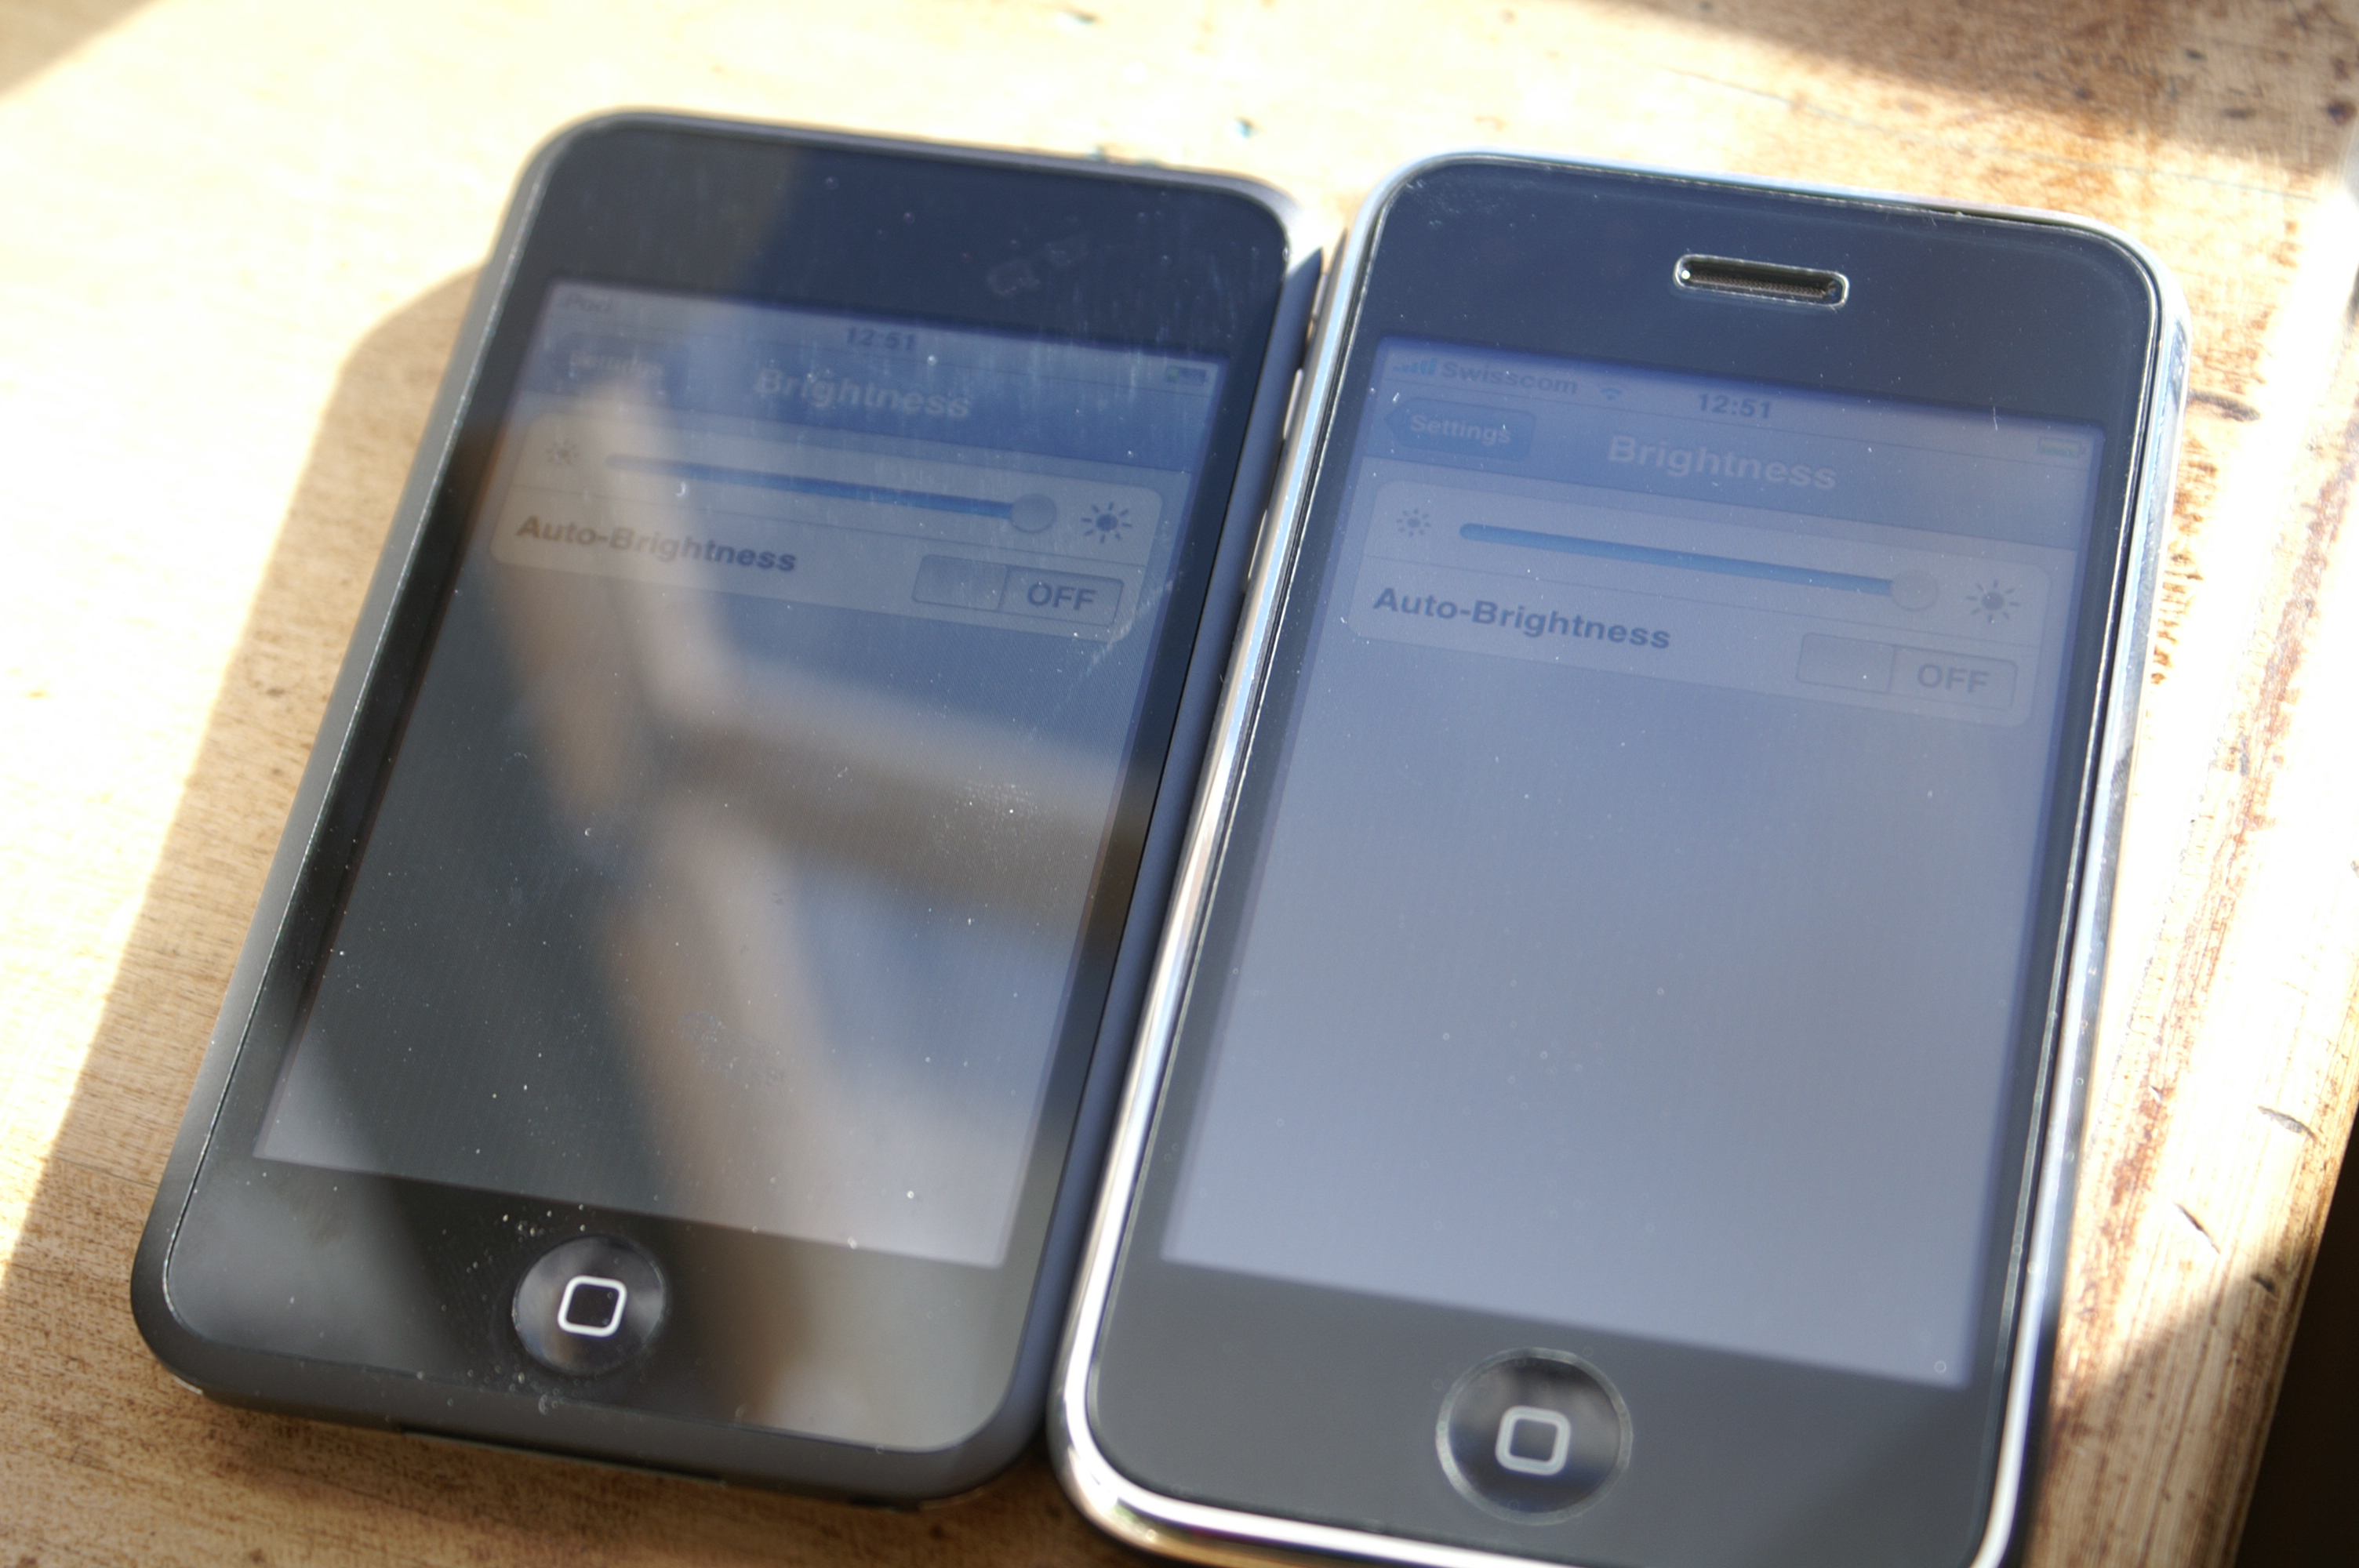 File:IPhone with Matte Screen Protector vs. Plain iPod.jpg